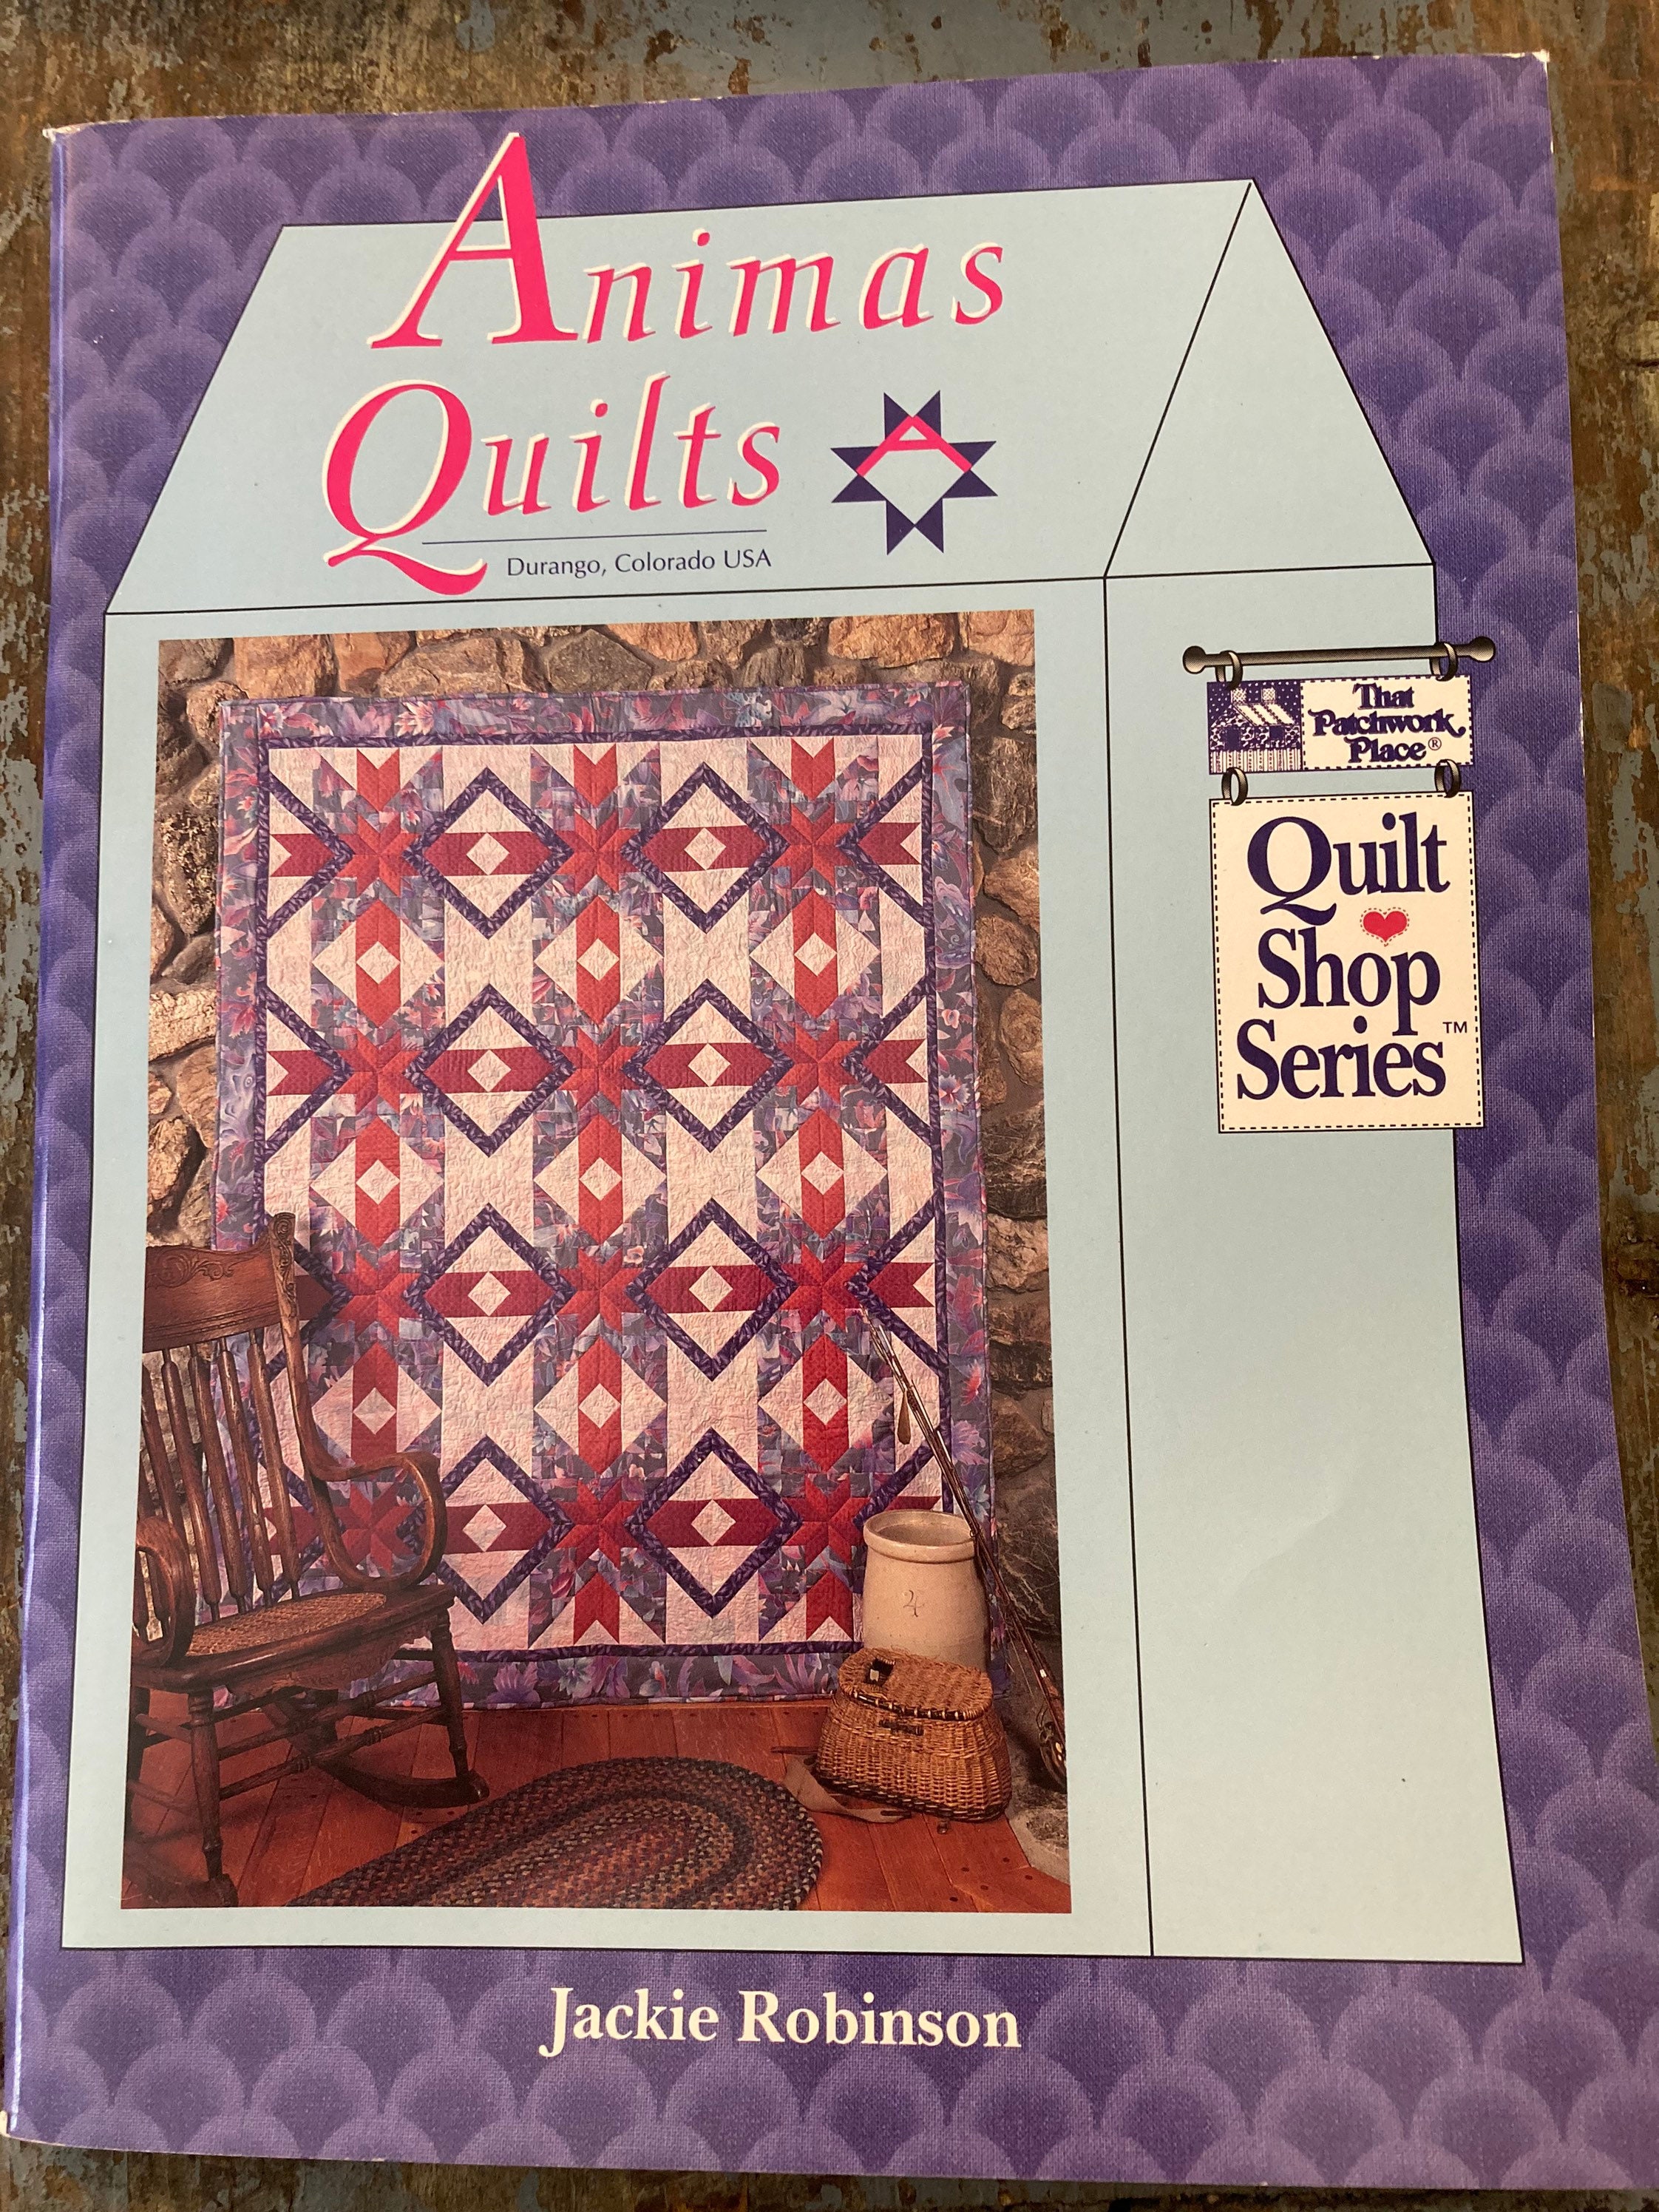 Lot of 5 quilt books Log Cabins Patchworker quilt pattern quilting color  #103